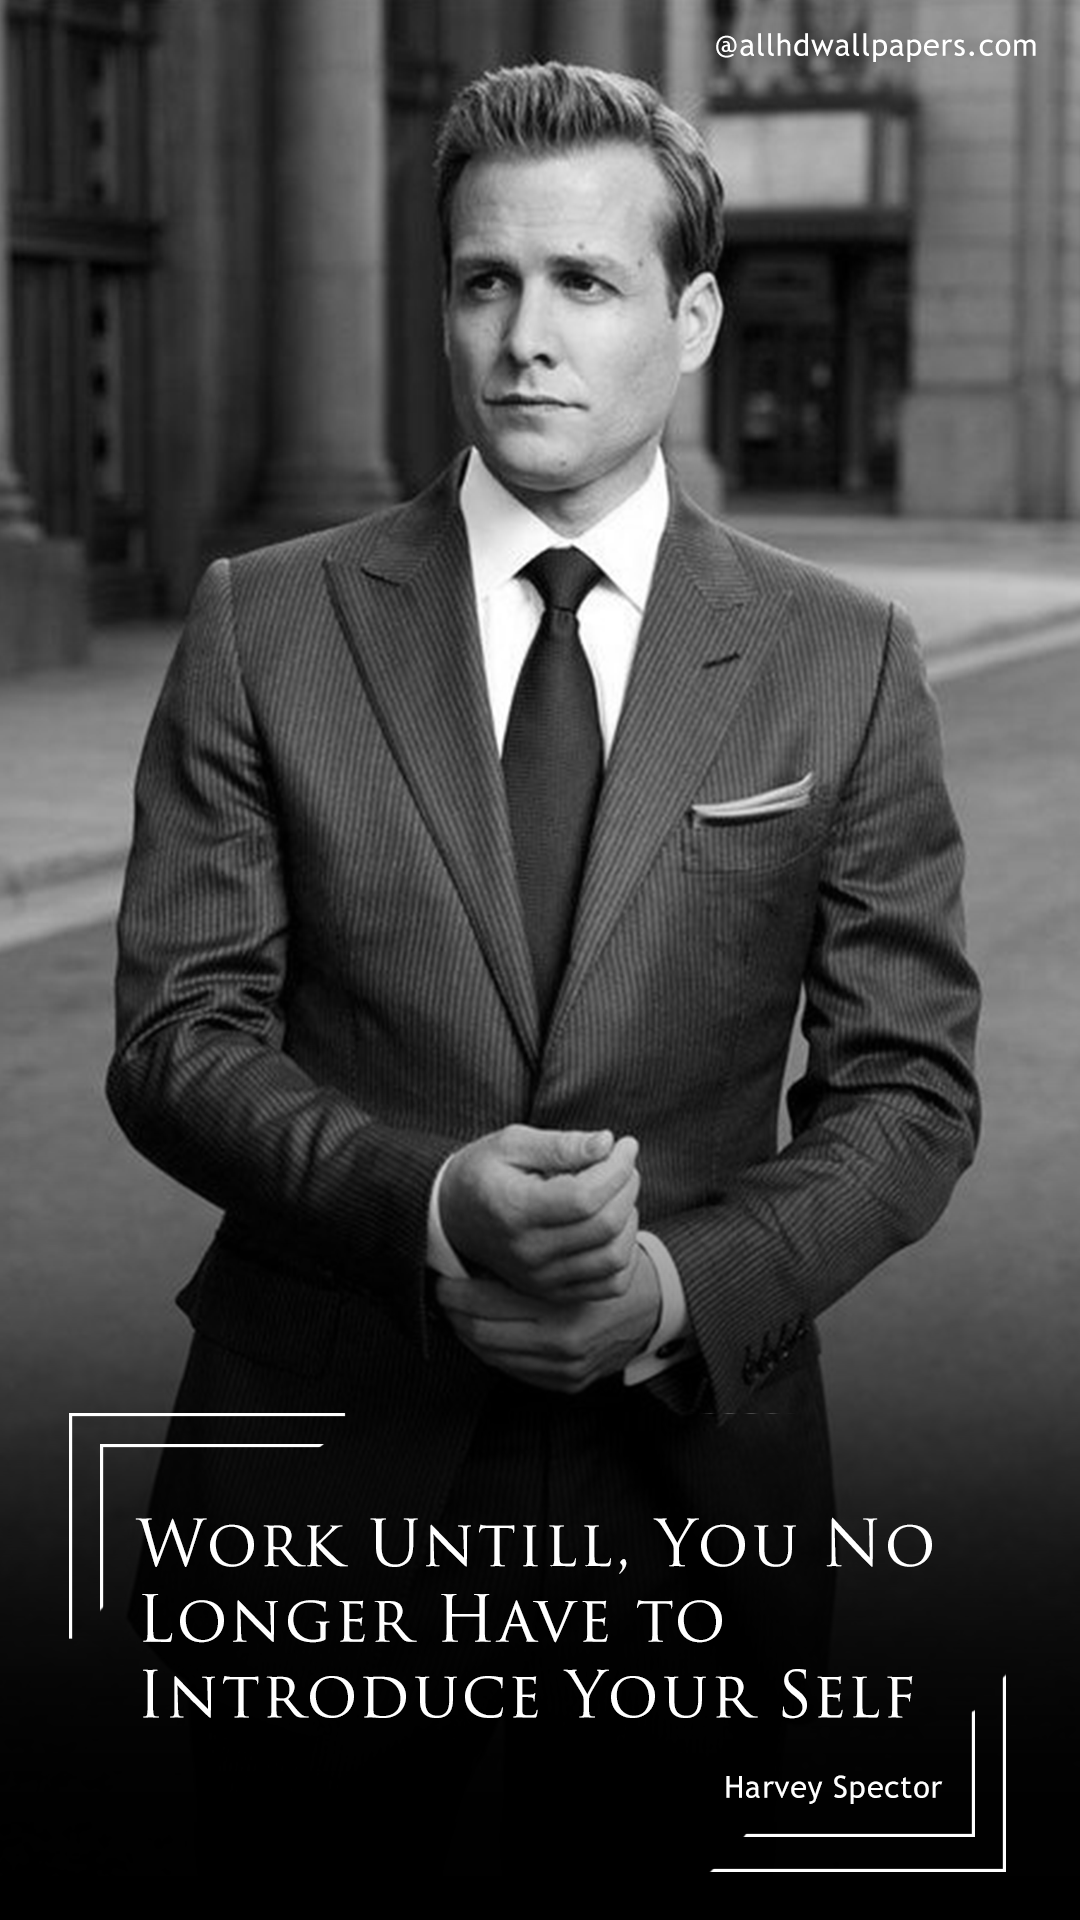 Harvey Specter Quotes will Inspire you to Work Hard. Harvey specter quotes, Suits quotes, Harvey specter